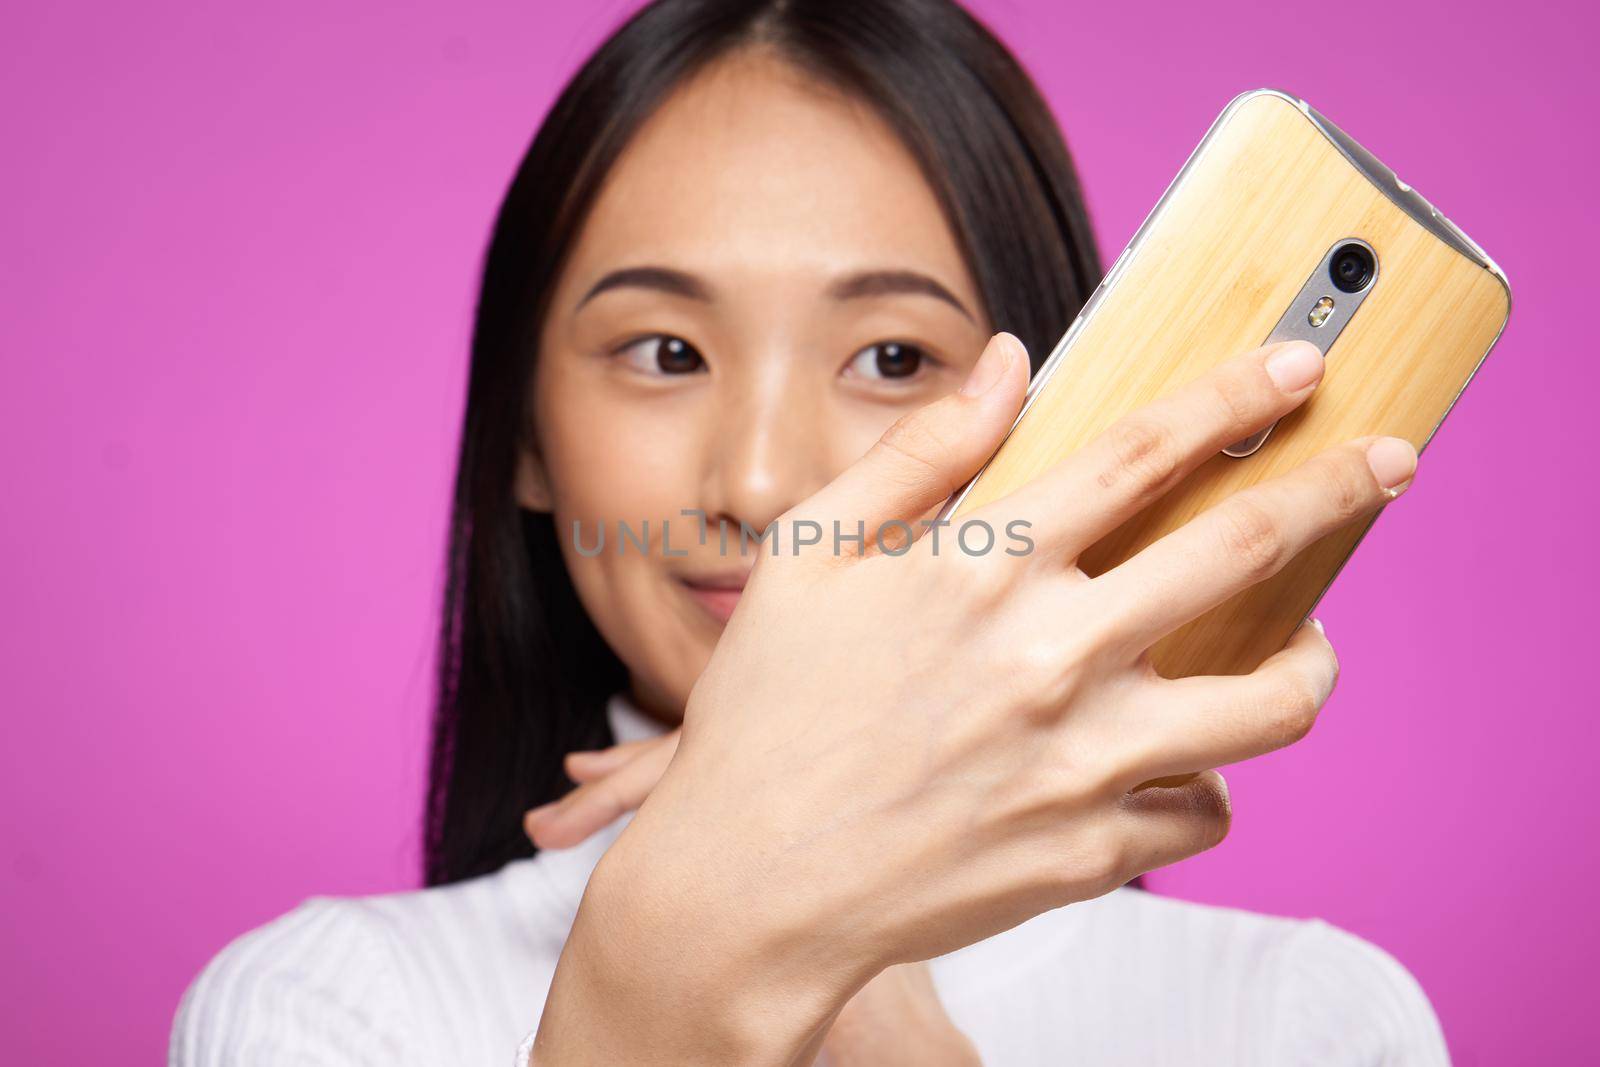 pretty asian woman with a phone in her hands looking at the screen close-up pink background. High quality photo